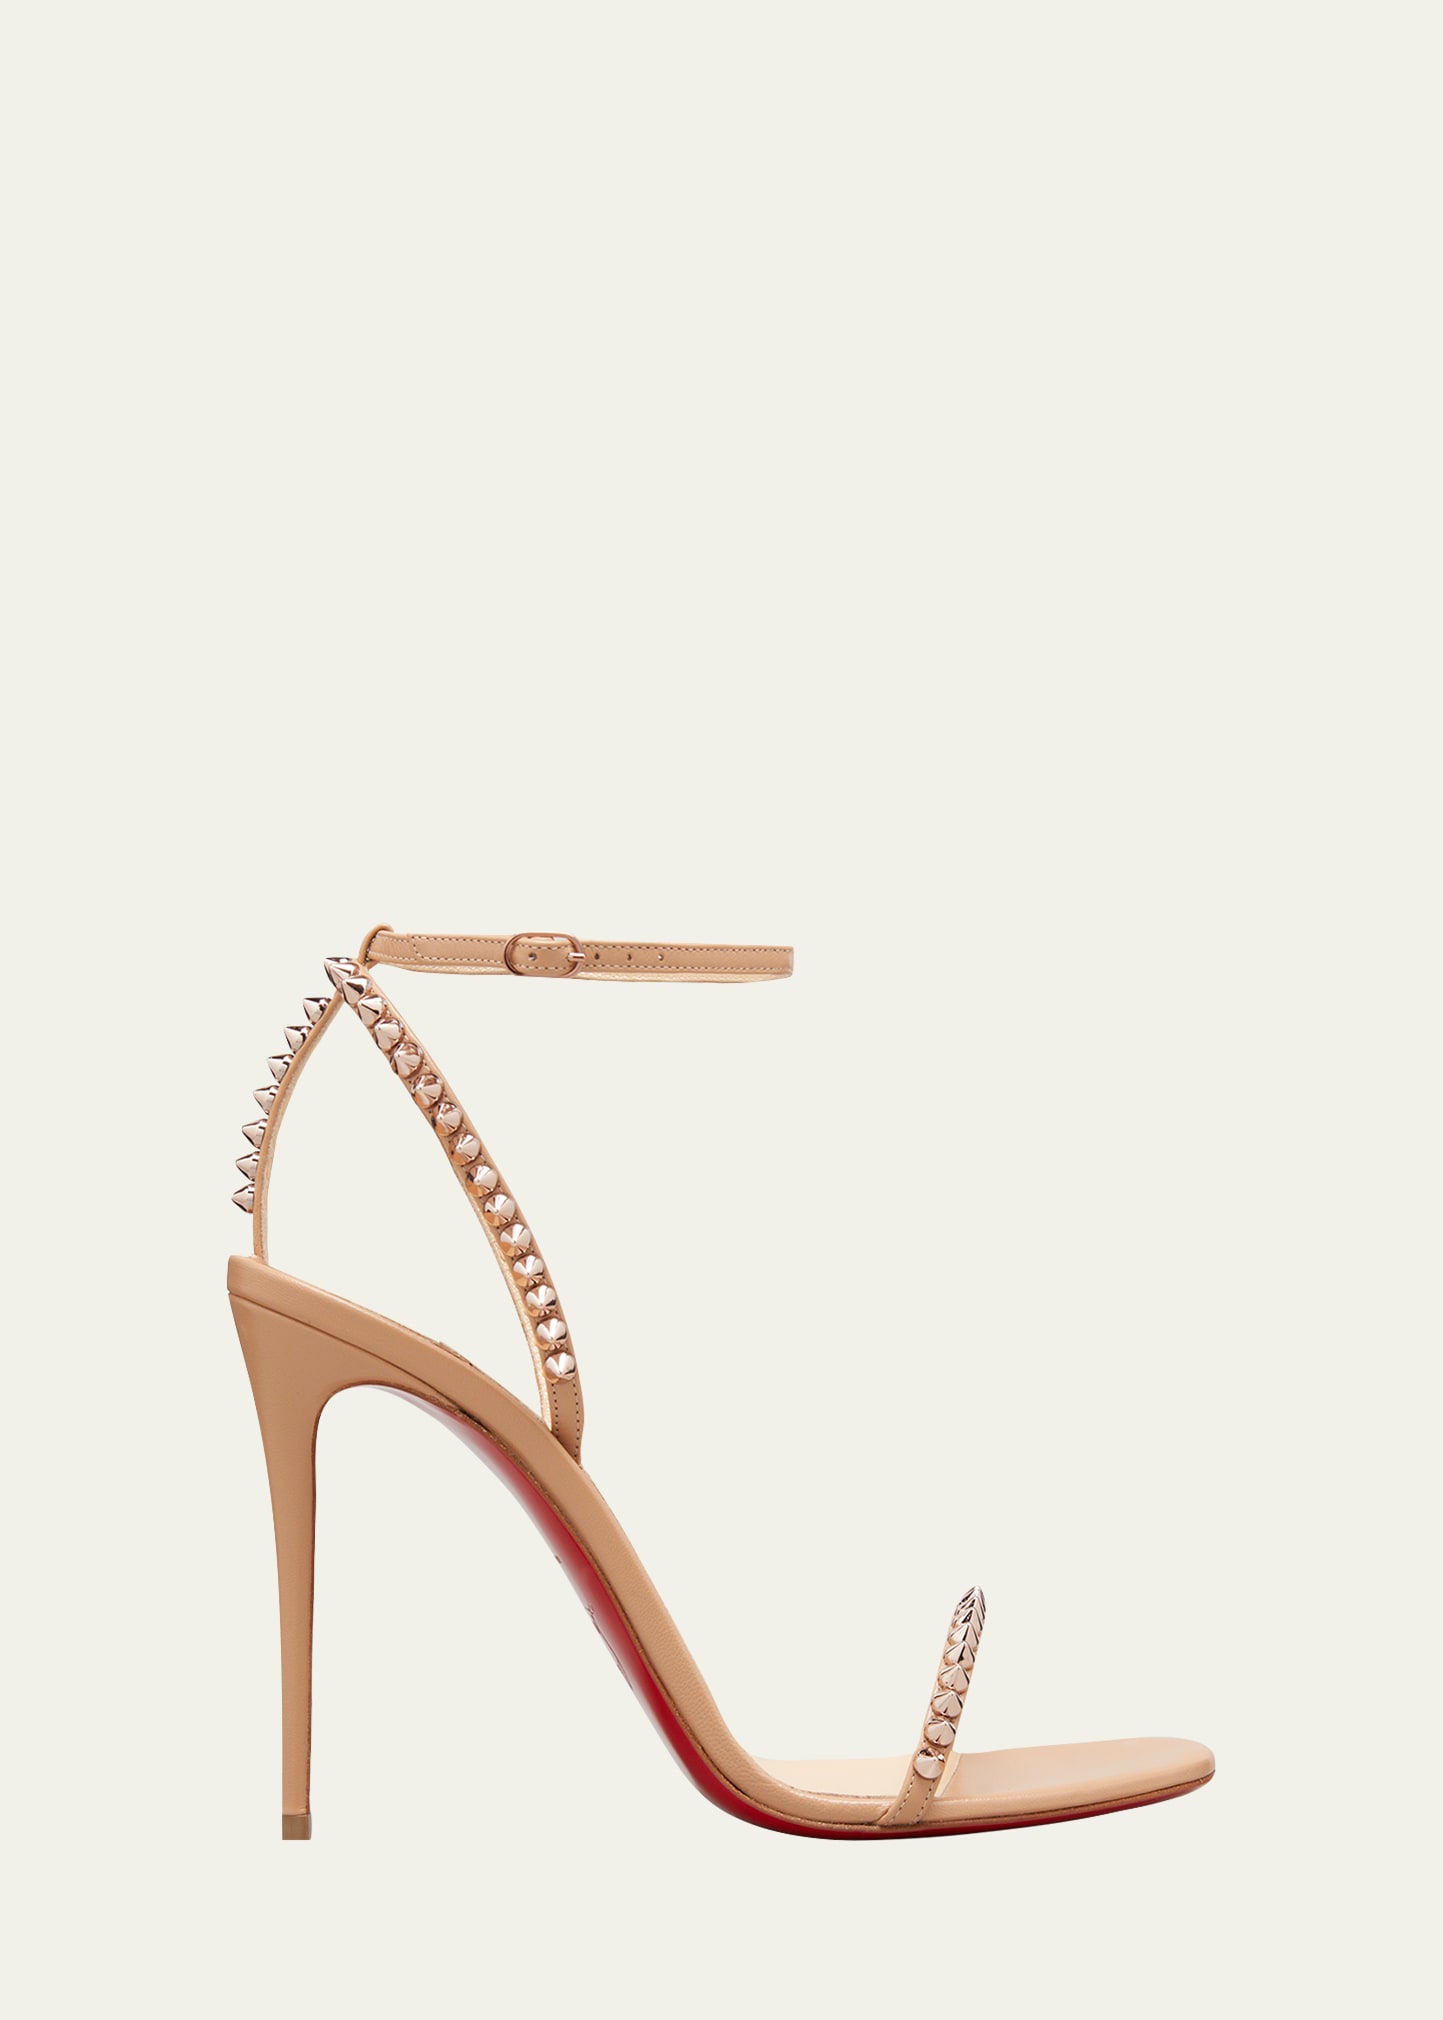 Christian Louboutin So Me Red Sole Spike Metallic Leather Sandals